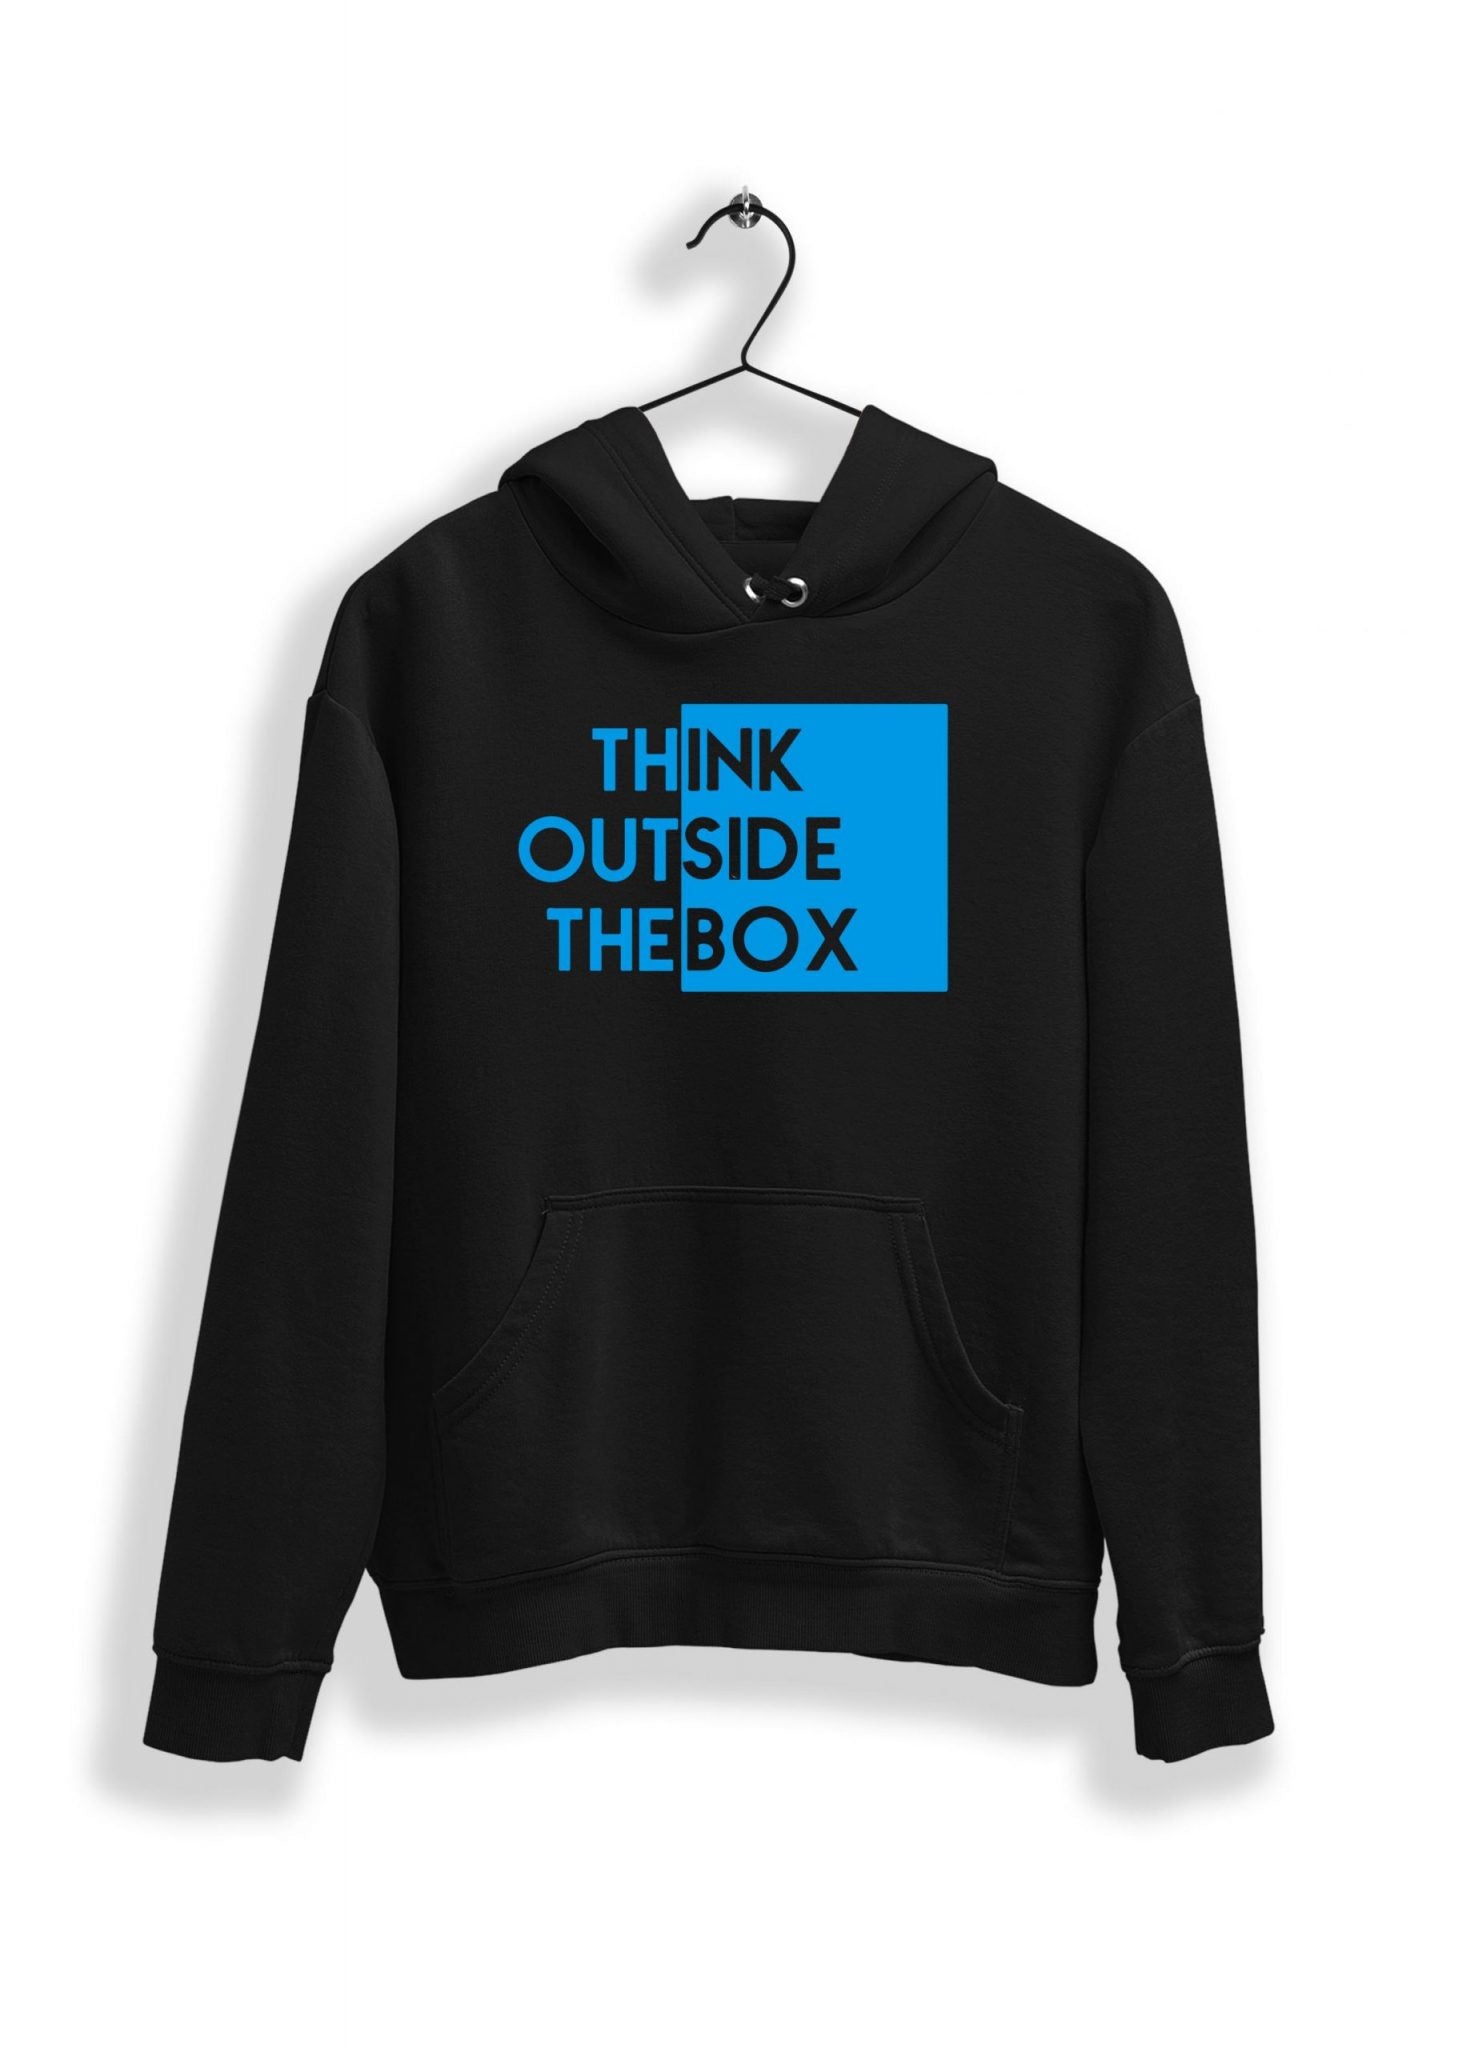 Thinking outside the Box Hoodie